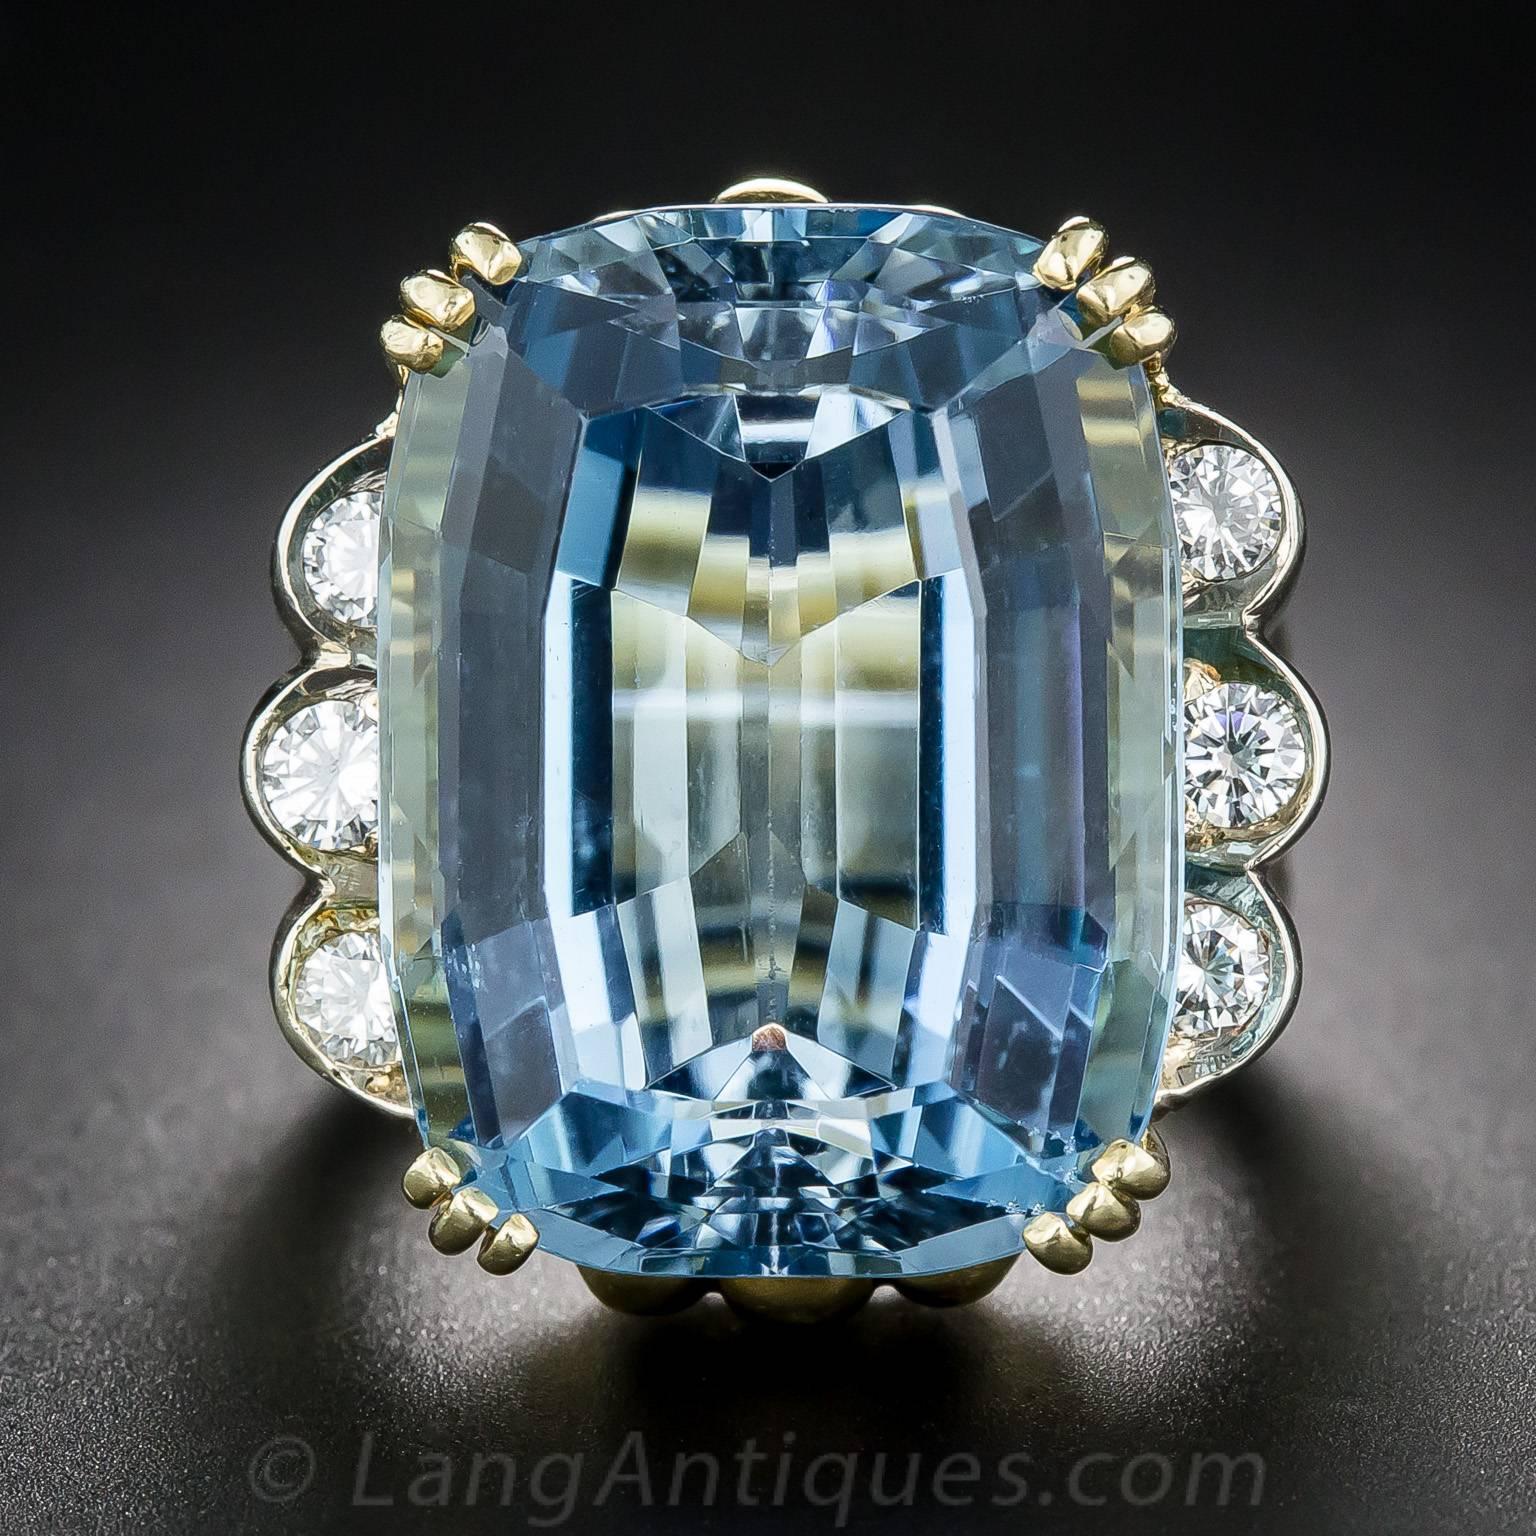 A gorgeous, deeply saturated, faceted cushion shape aquamarine, weighing in at an impressive 27 carats, radiates a magnificent Mediterranean-blue hue. The gemmy gemstone is stylishly presented in a comfortable 18 yellow gold mounting designed with a